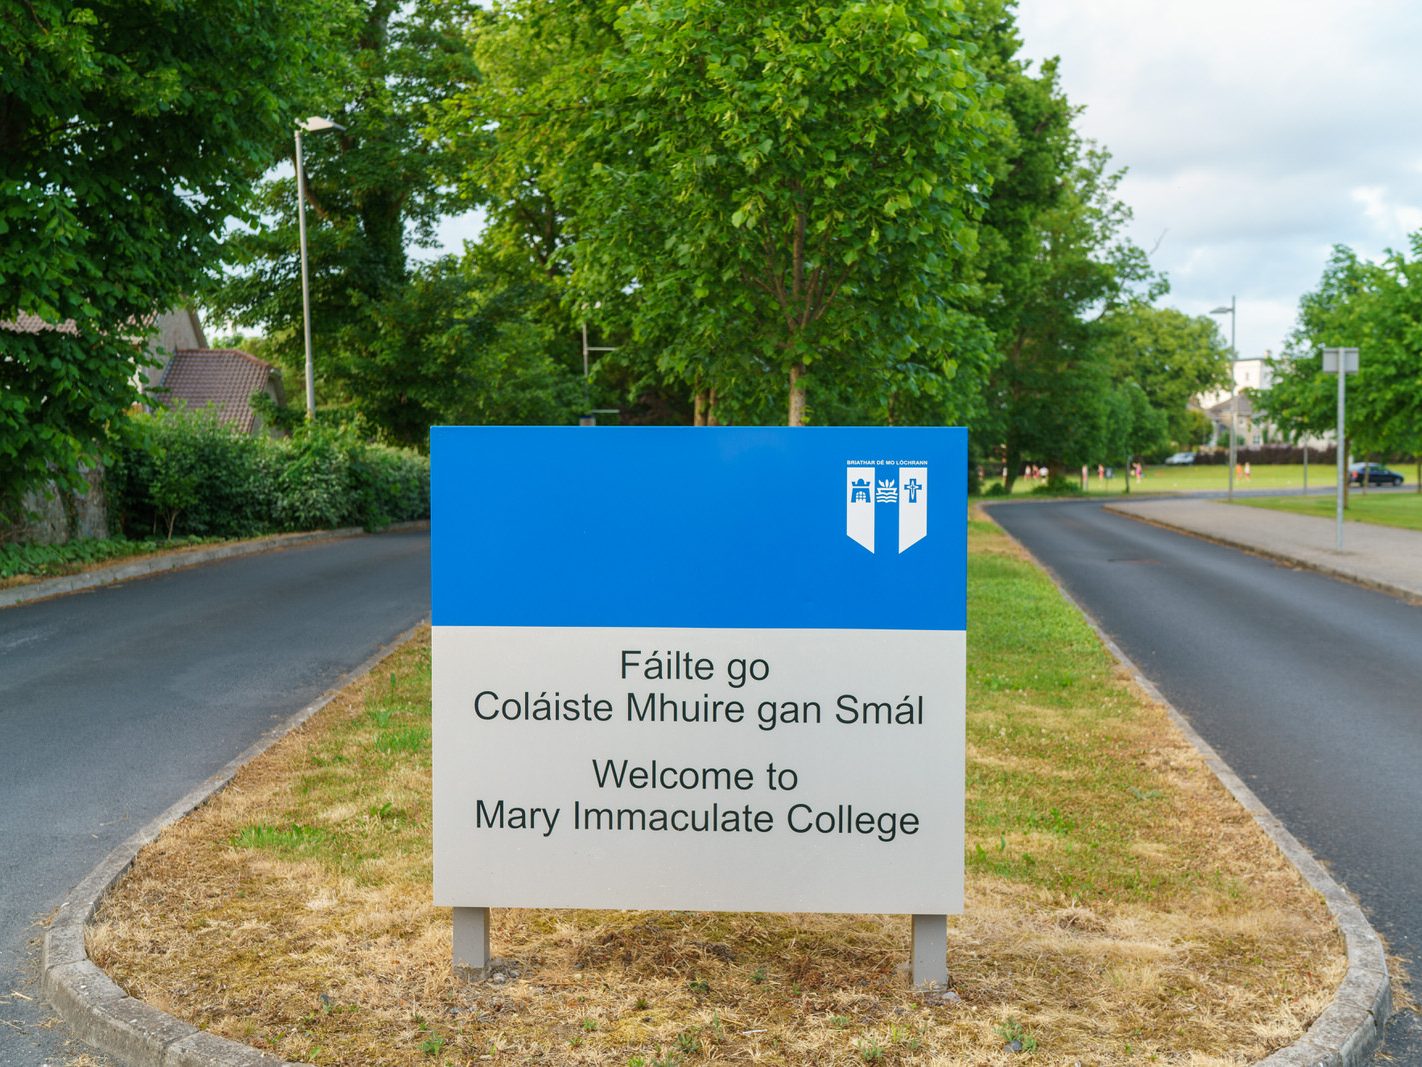 MARY IMMACULATE COLLEGE IN LIMERICK CITY [ALSO KNOWN AS MIC OR MARY I]-227638-1